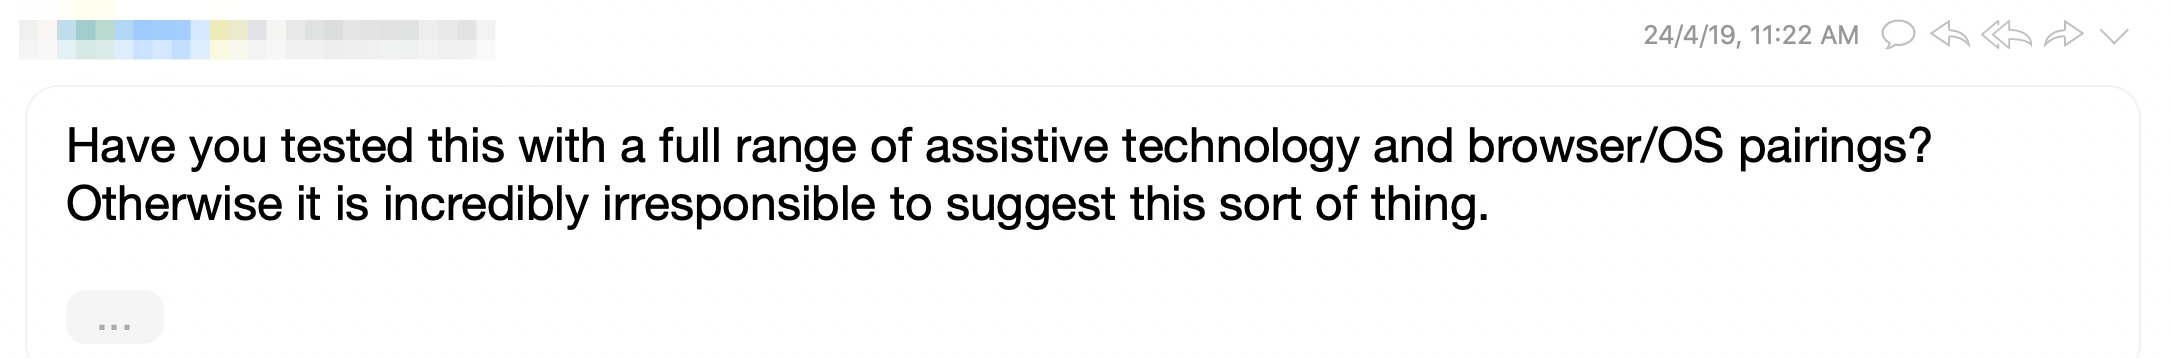 Email that asked if I tested this with a full range of assistive technology and browser pairings. If I didn't, then I'm being incredibly irresponsible.